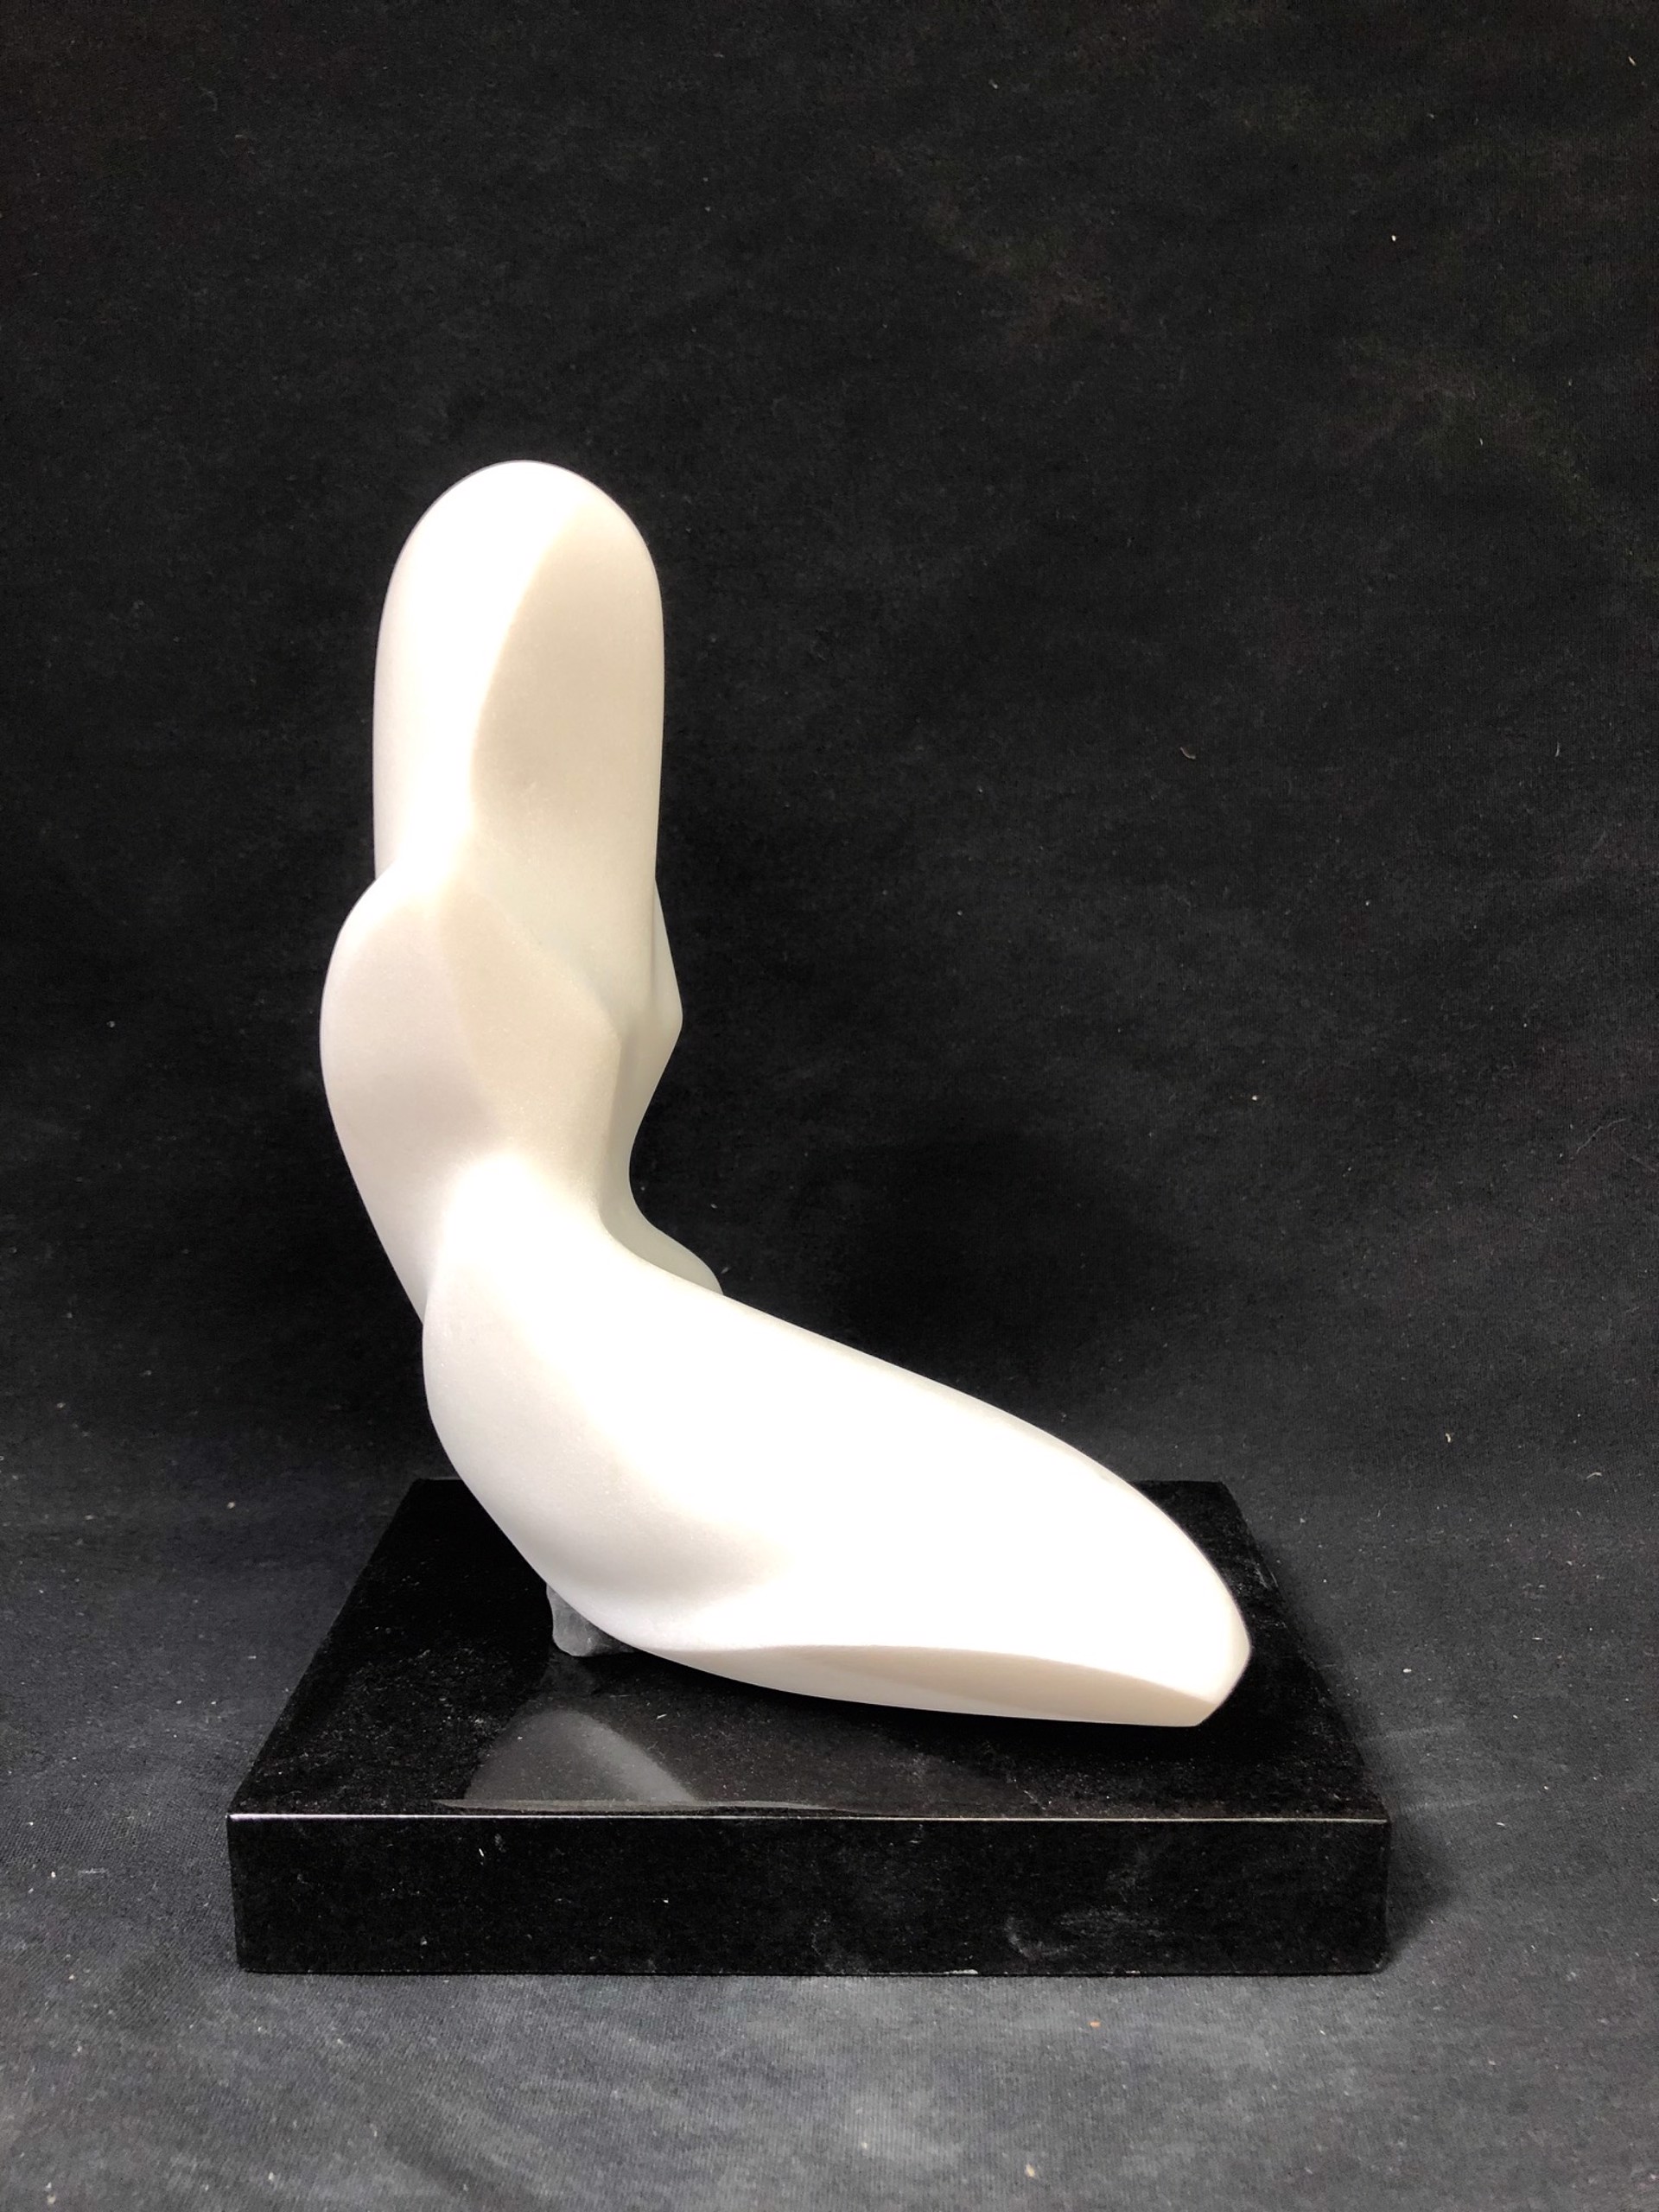 Seated Figure 1 (Maquette) by Steven Lustig